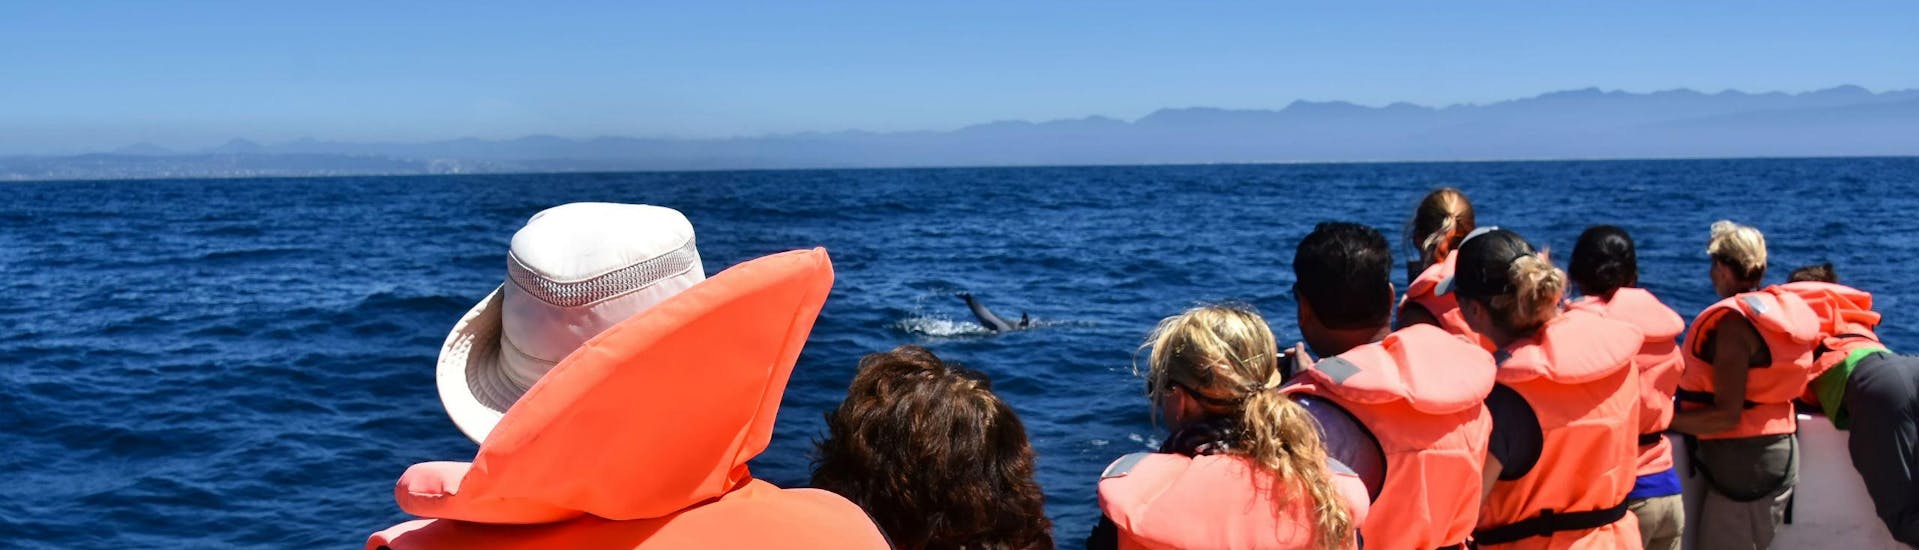 A group of people is watching a dolphin frolicking in the sea while on a boat trip in Plettenberg Bay.